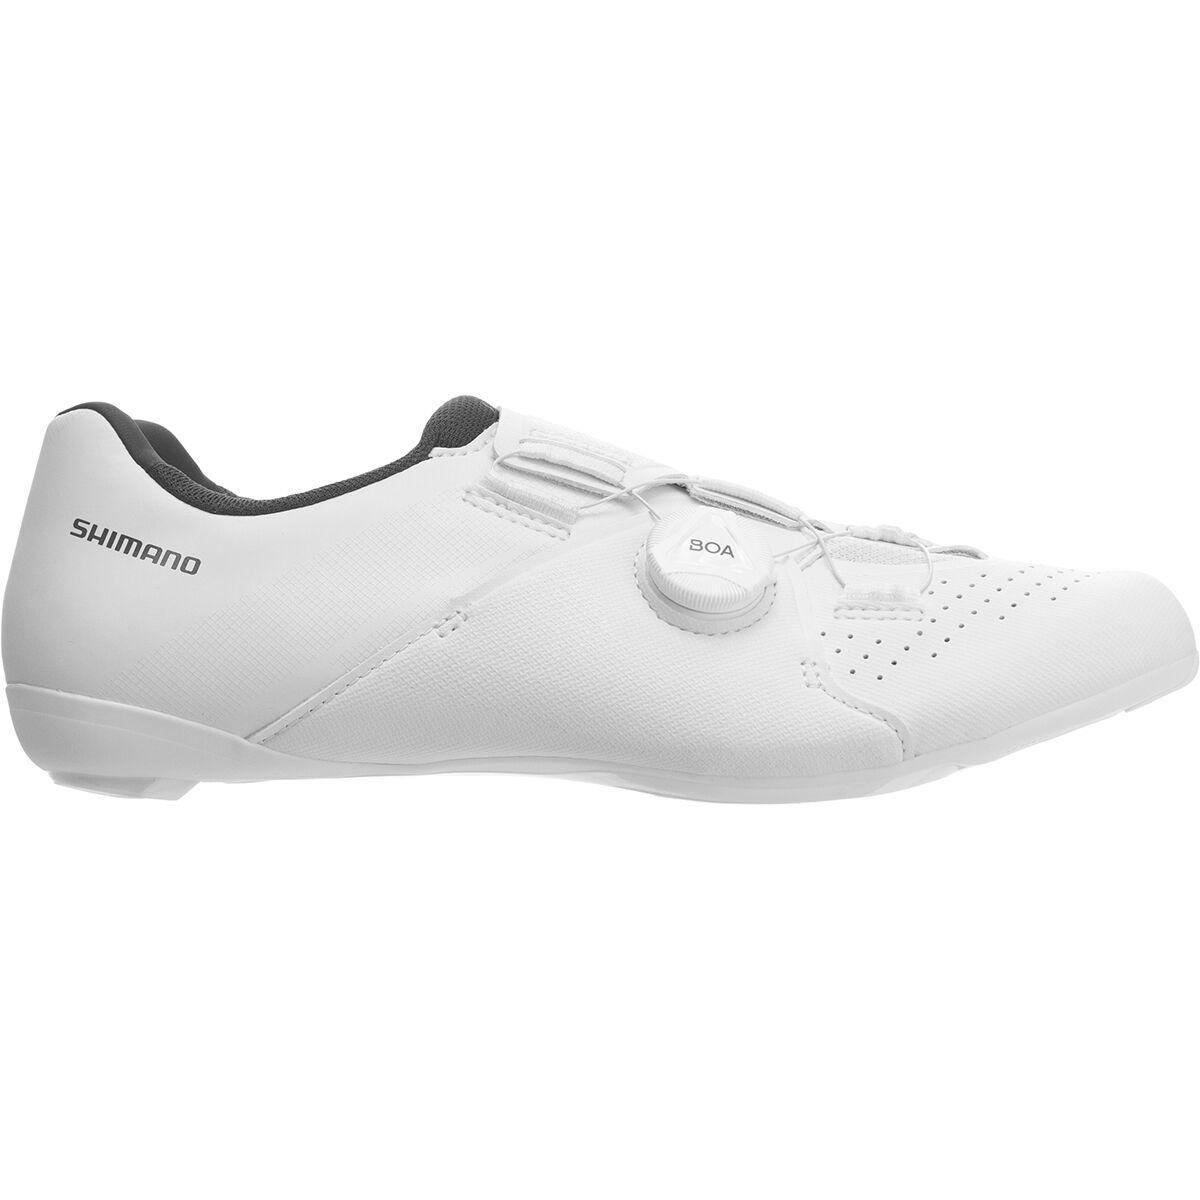 Shimano RC300 Limited Edition Cycling Shoe - Womens